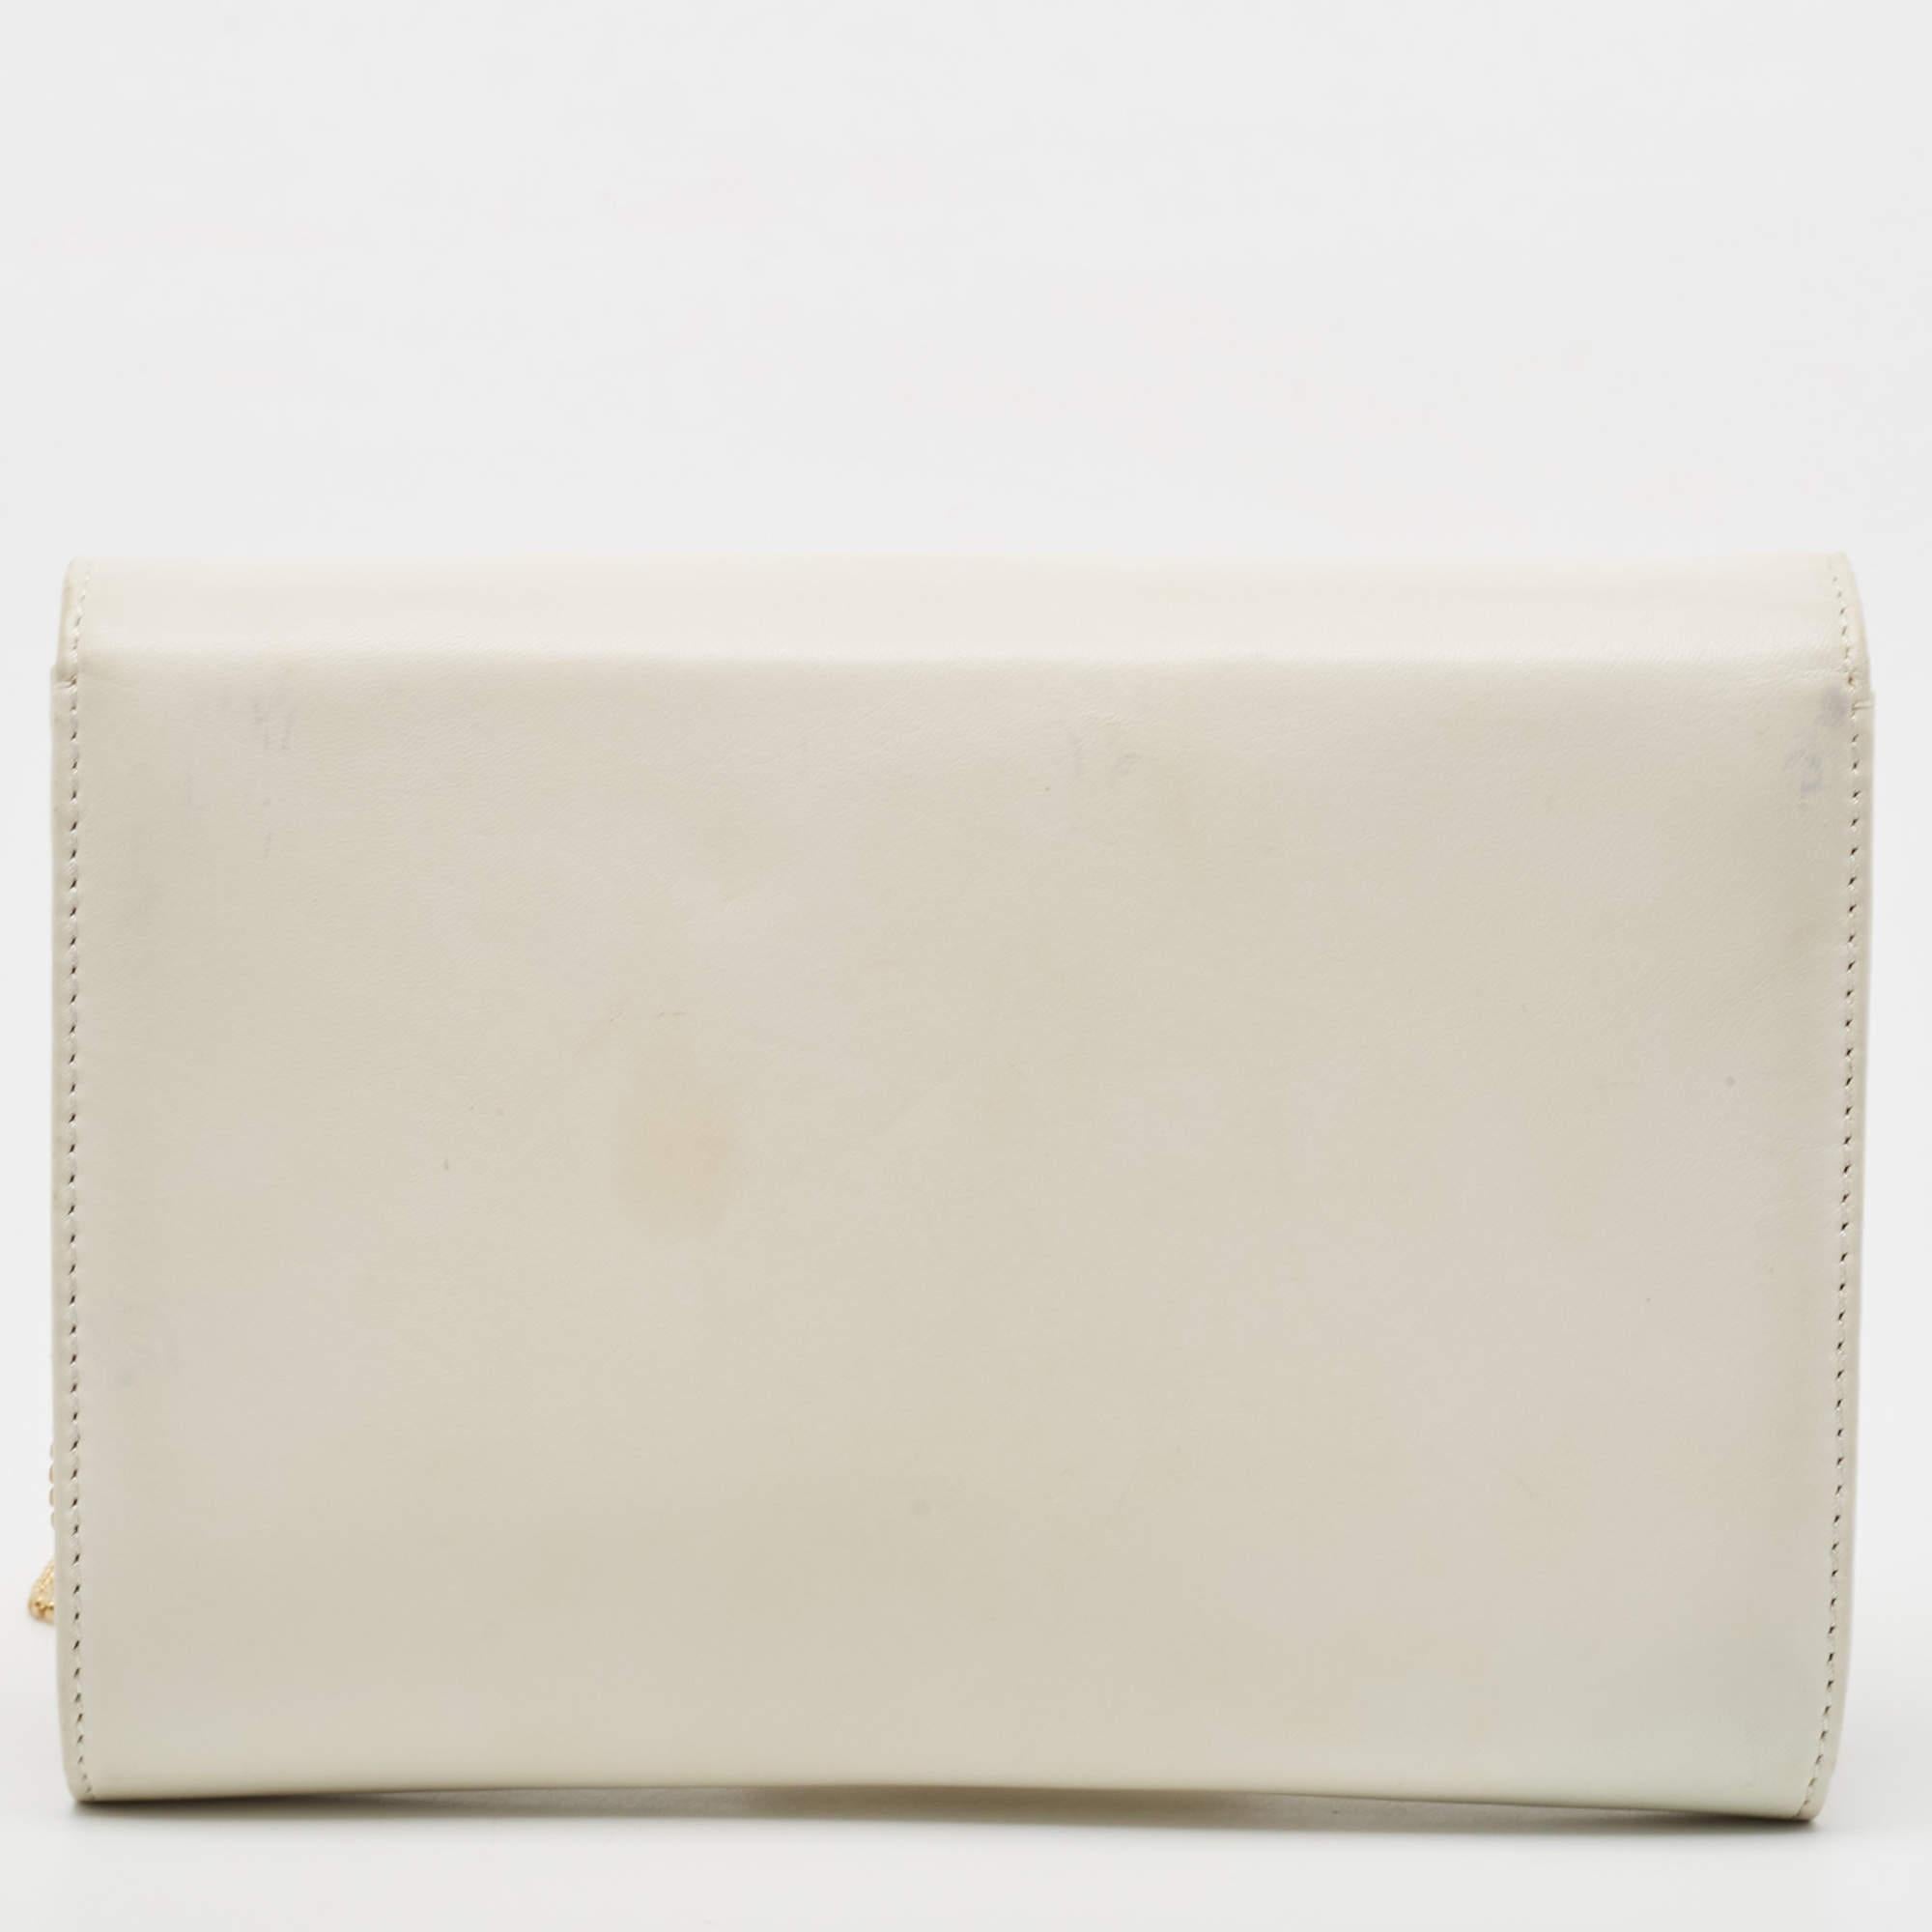 This clutch from Versace is designed in an off-white leather body. It brings a Medusa-adorned flap to secure the interior which is lined with satin. It comes held by a long chain and is perfect for evenings.

